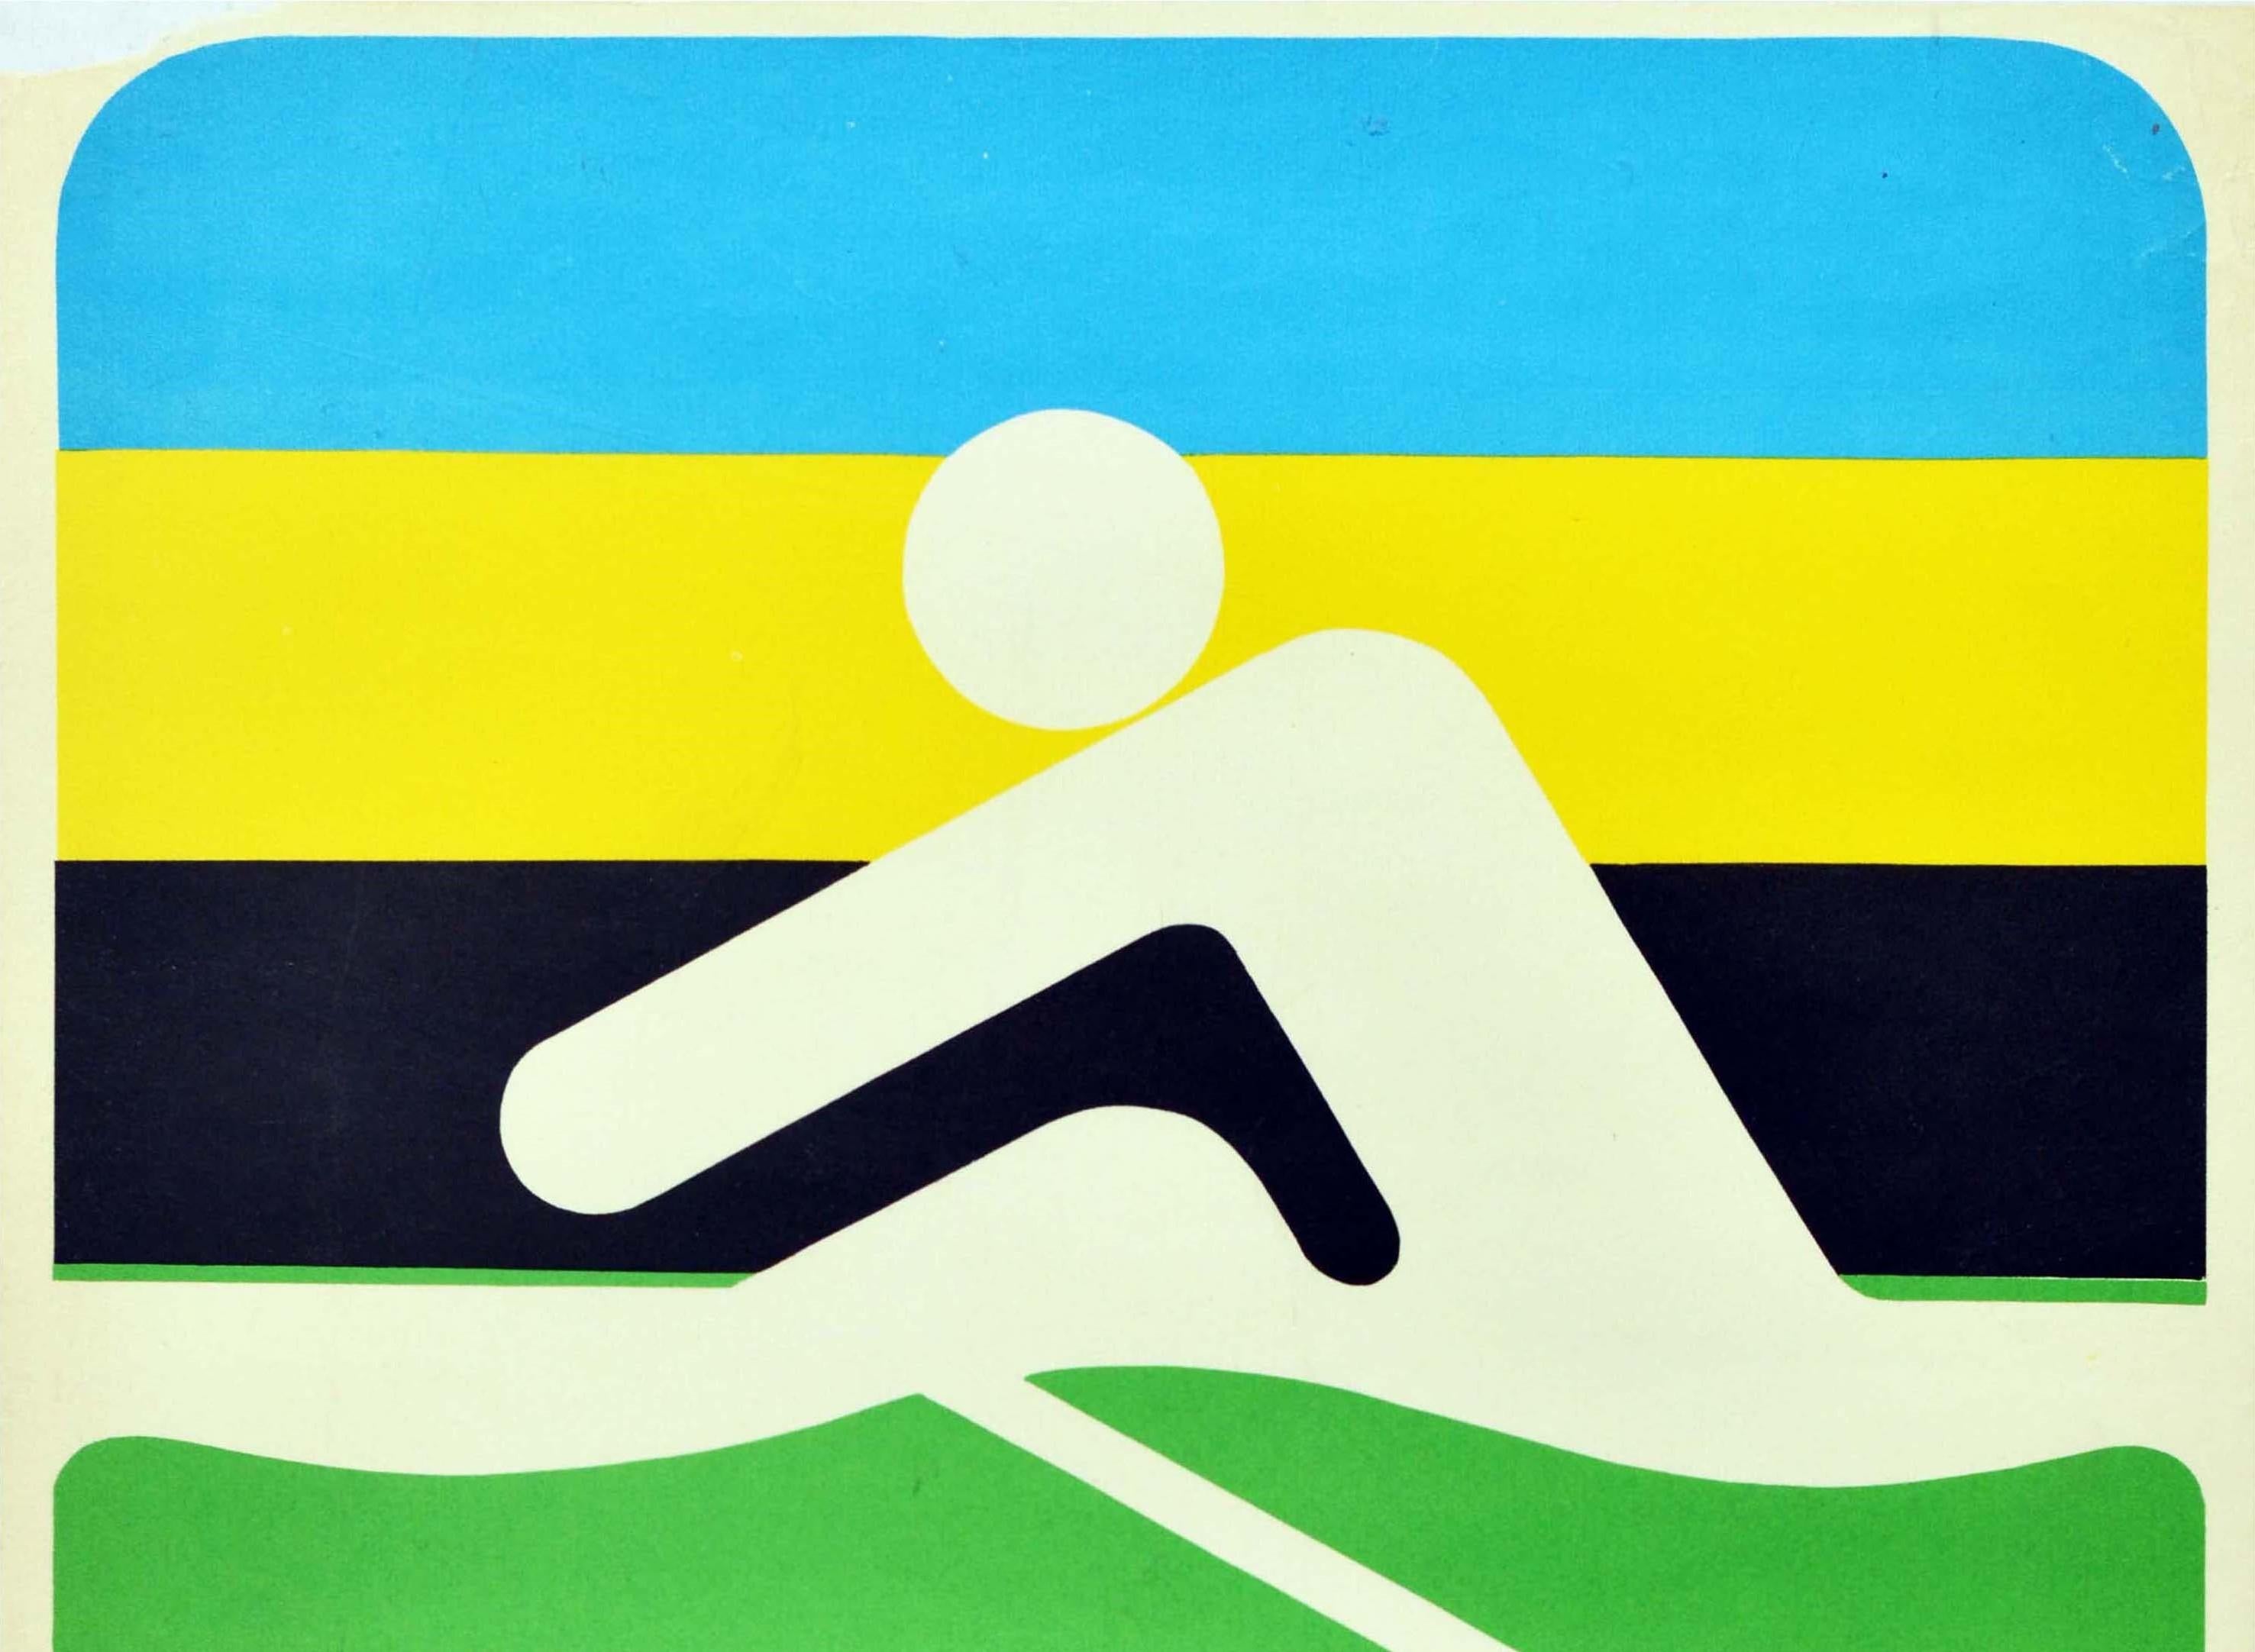 Original Vintage Sport Poster Moscow Olympics 1980 Pictogram Rowing Race Photo - Print by M Manuilov